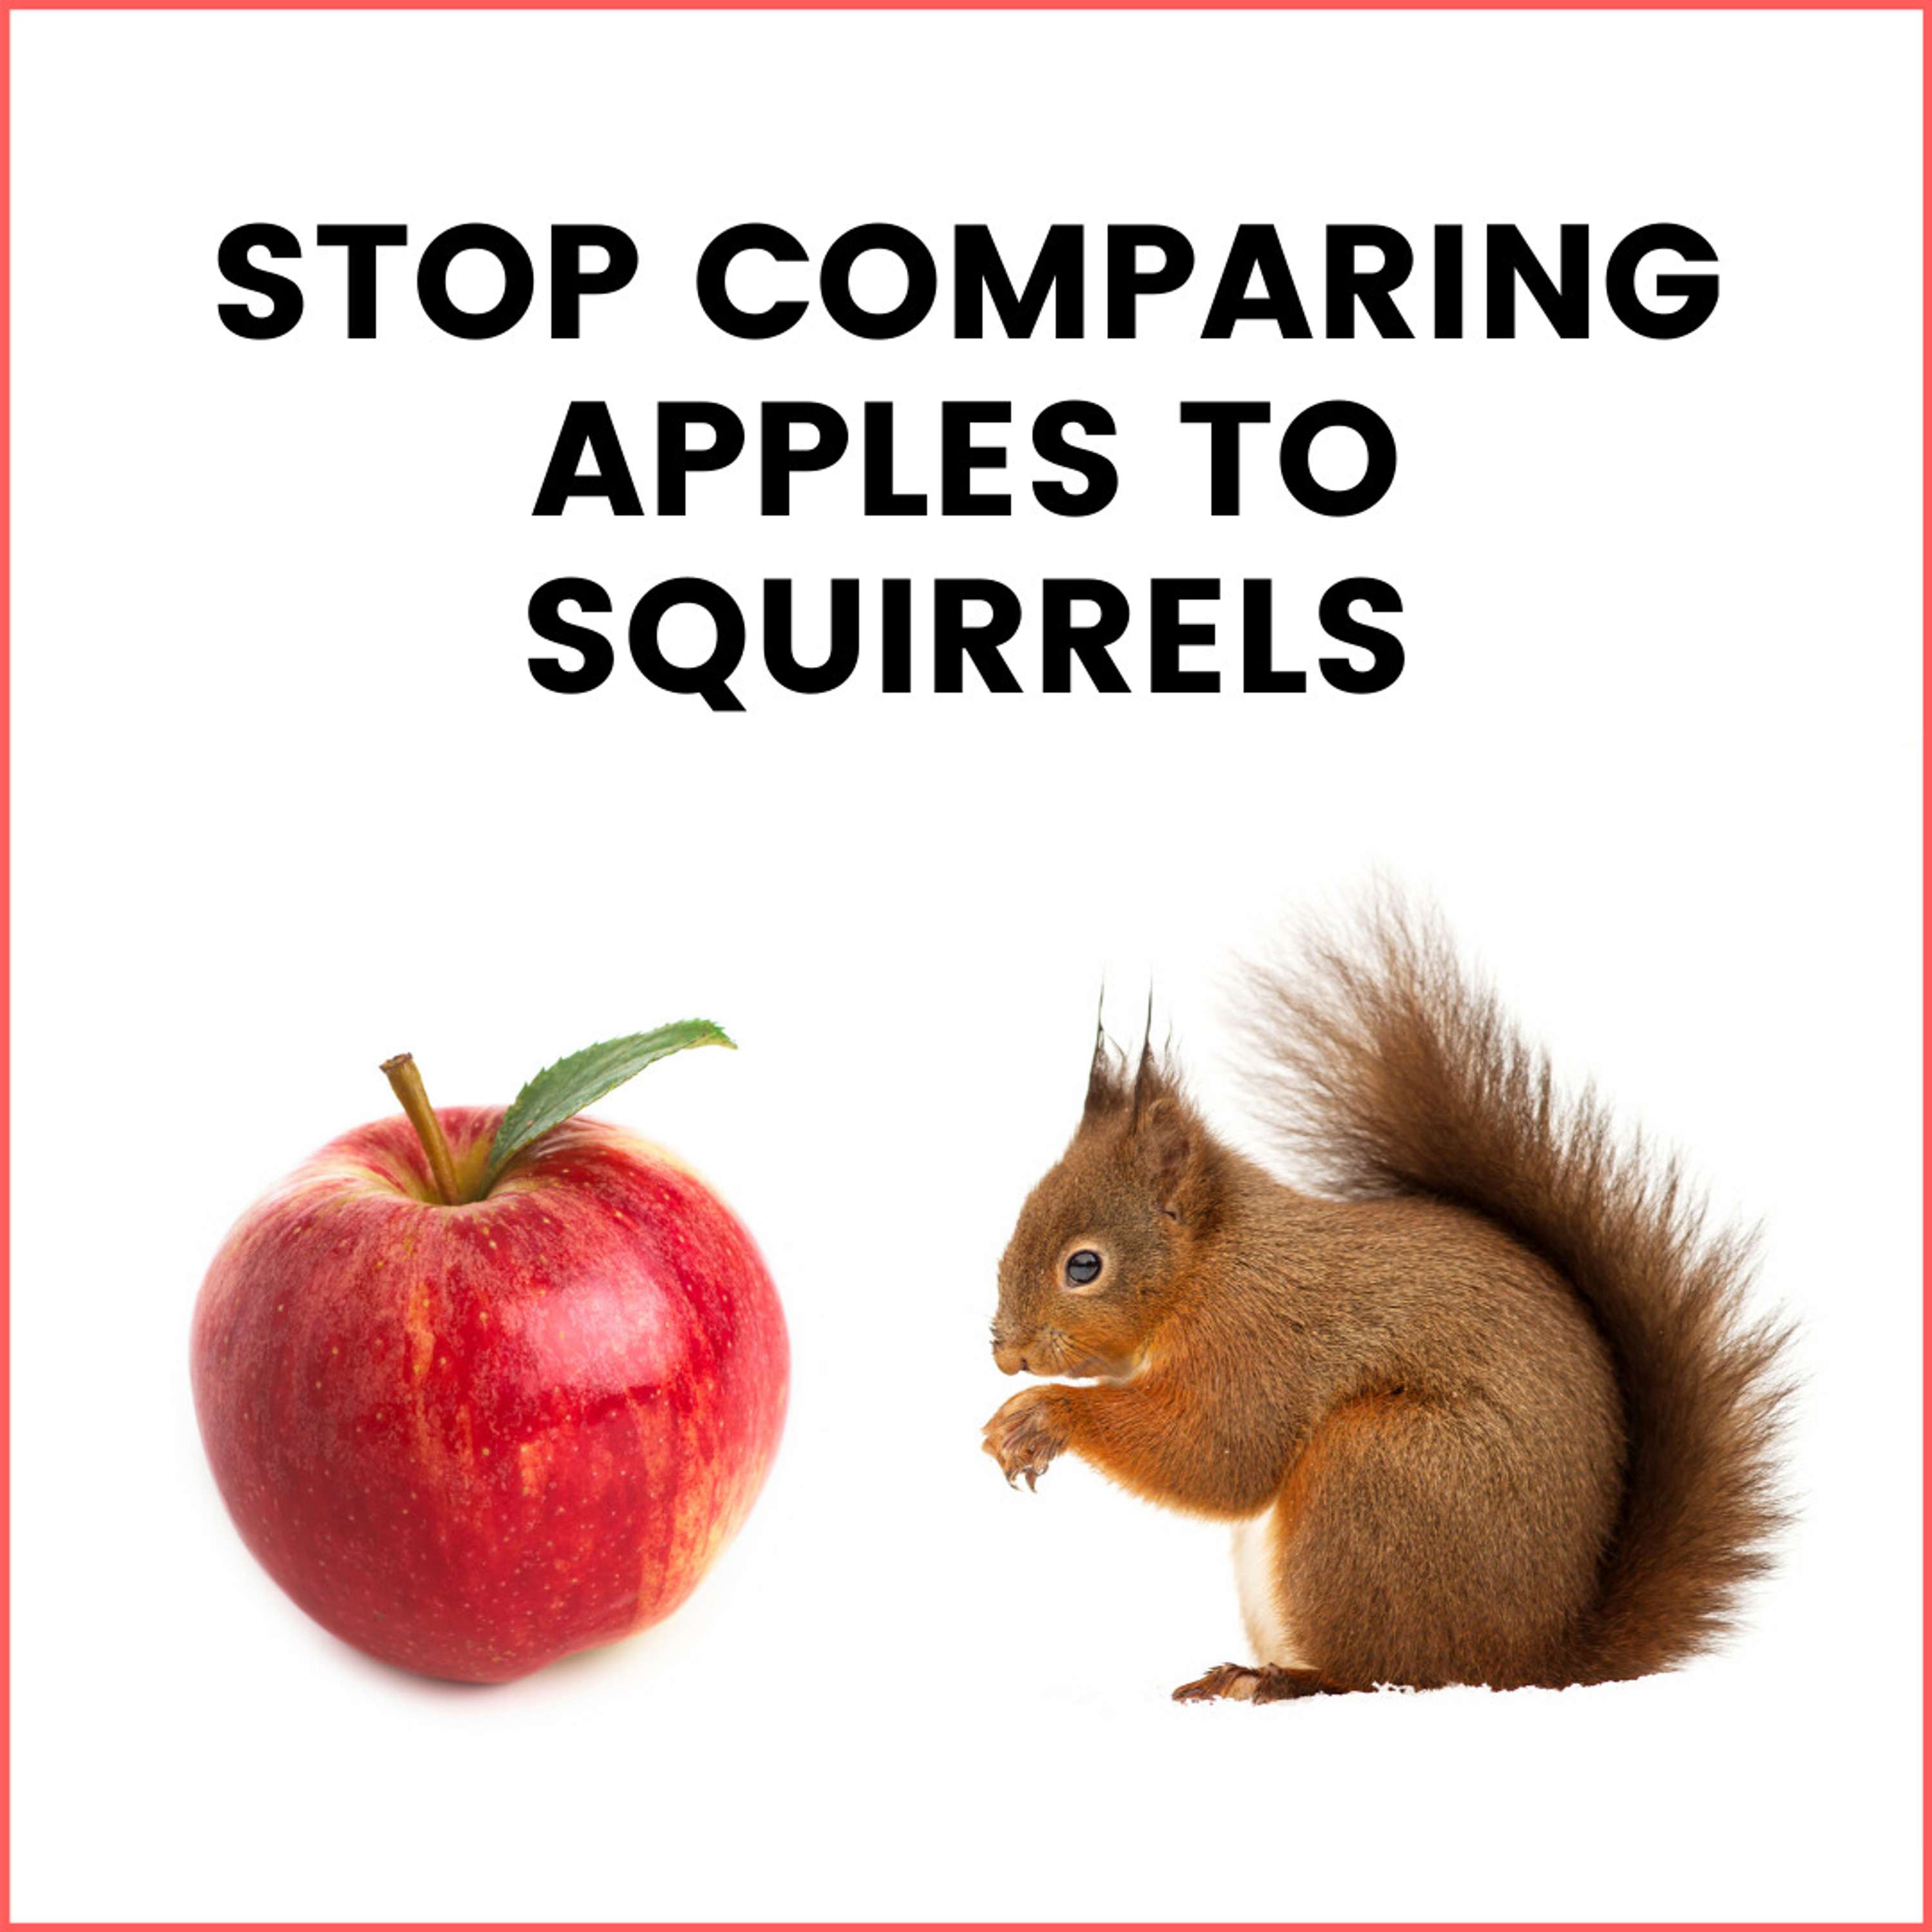 31. Stop Comparing Apples to Squirrels